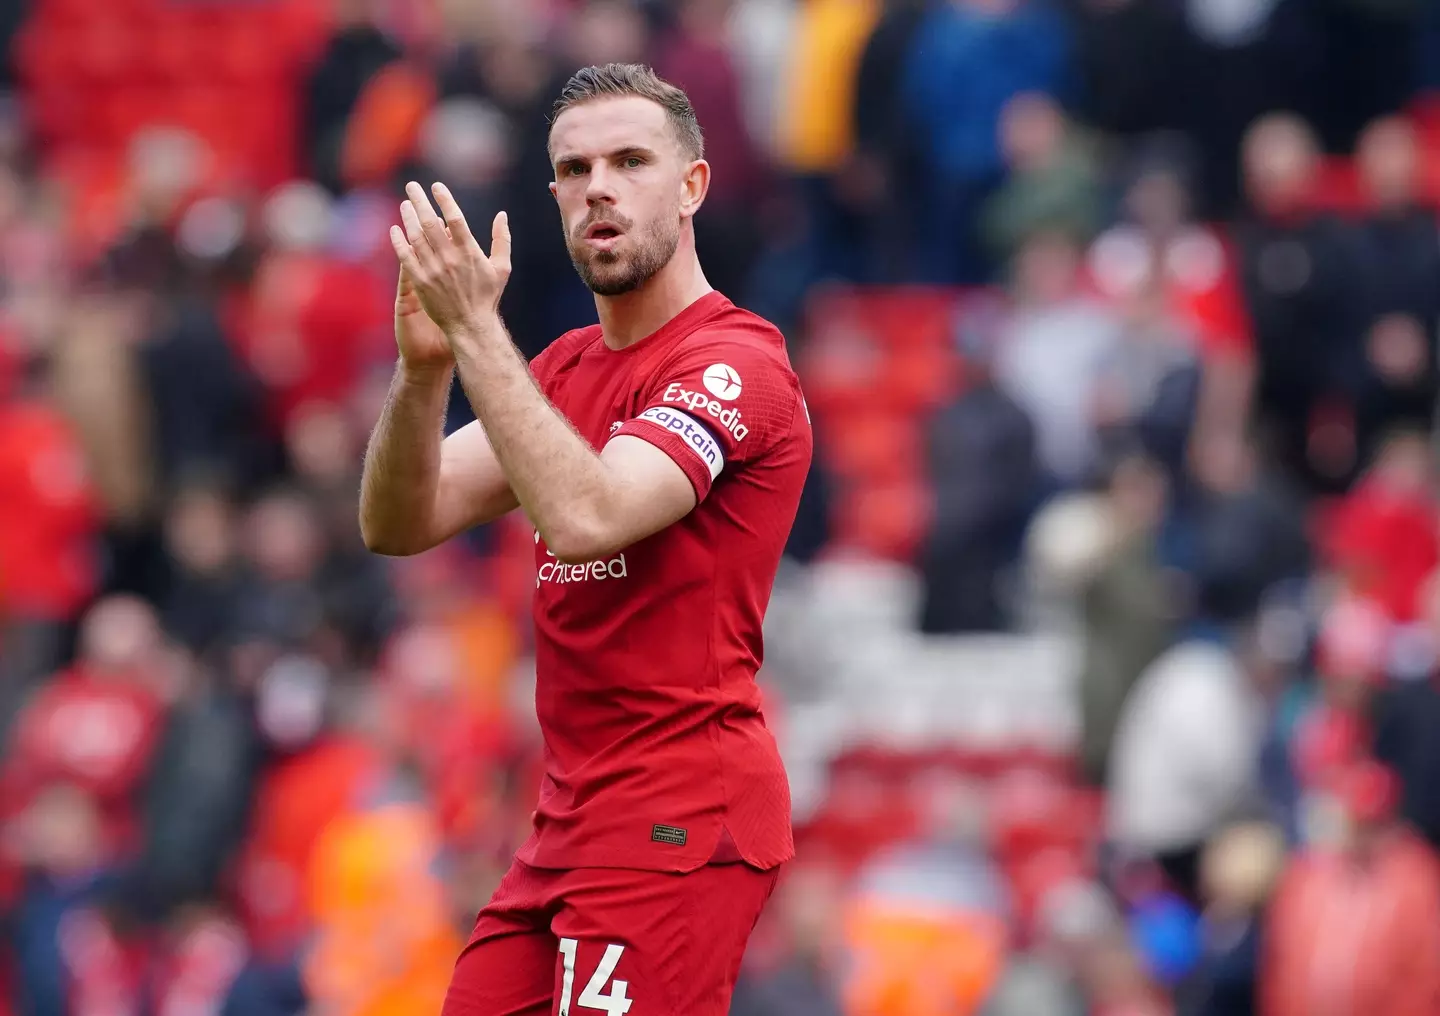 Henderson claps the fans after the win. Image: Alamy